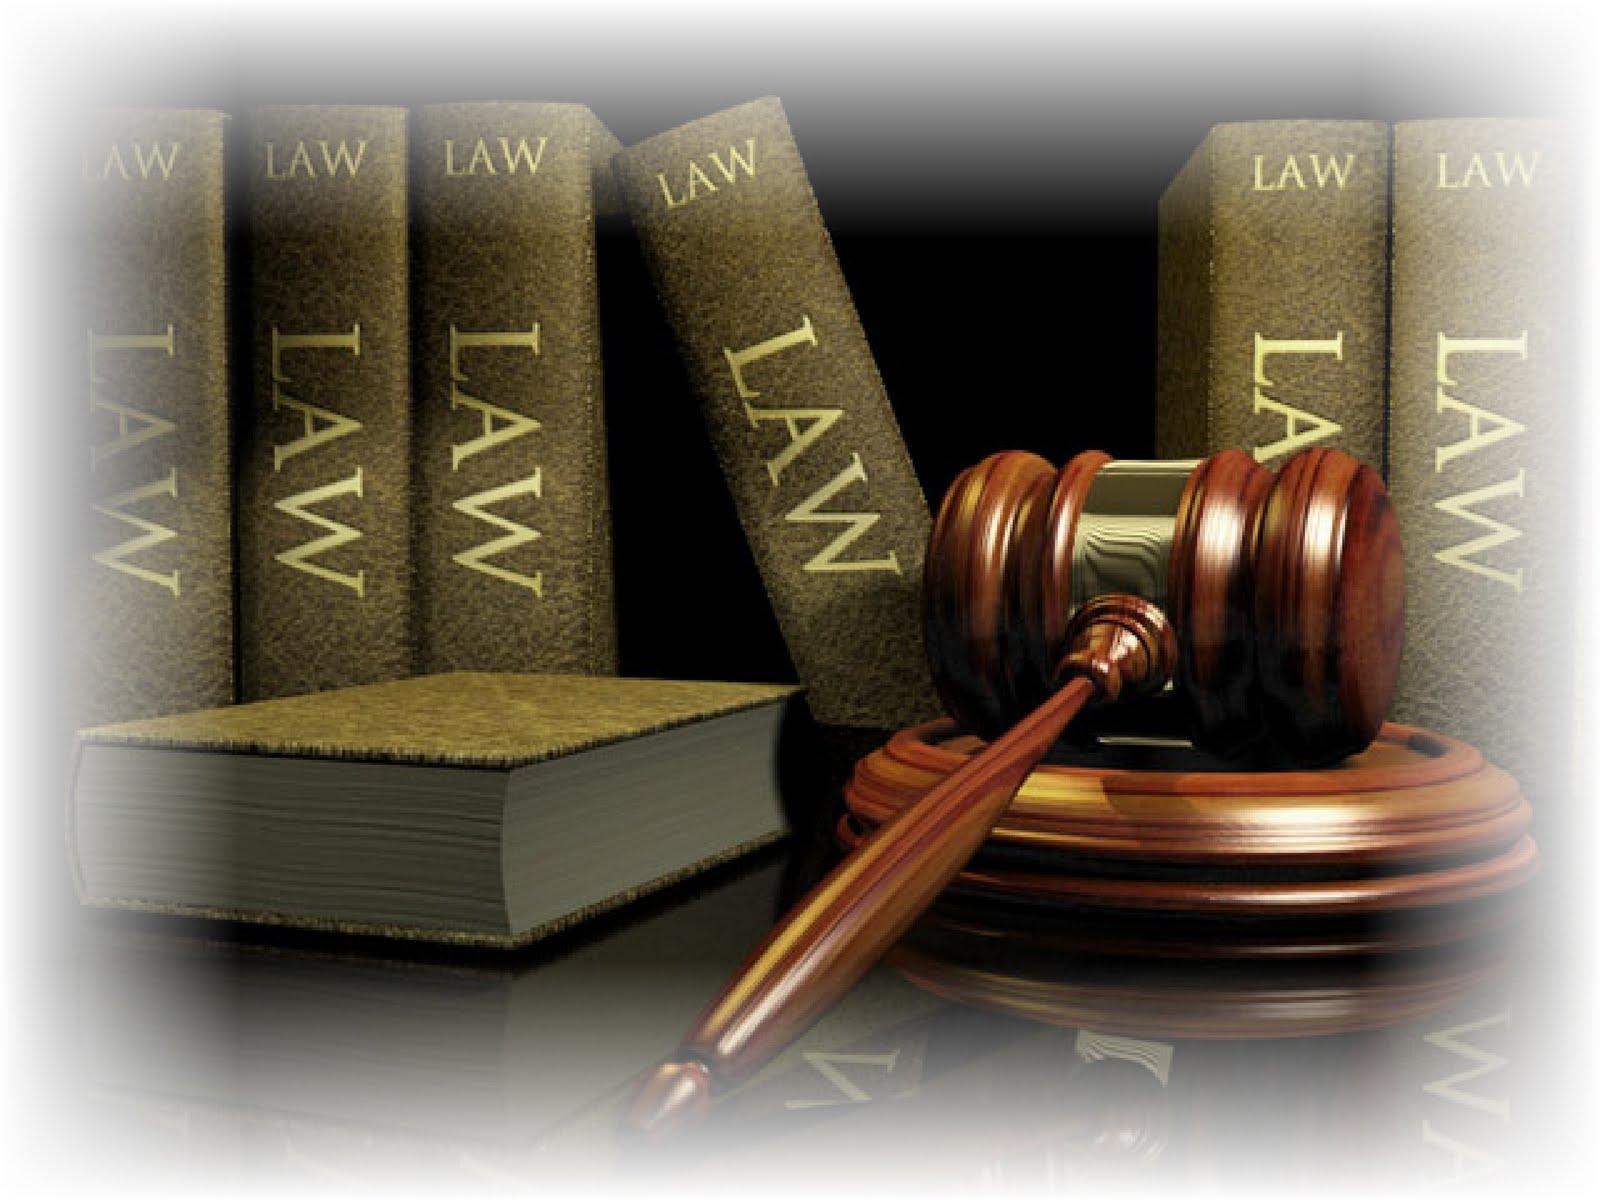 Lawyer Wallpaper, Best Lawyer Wallpaper in High Quality, Lawyer